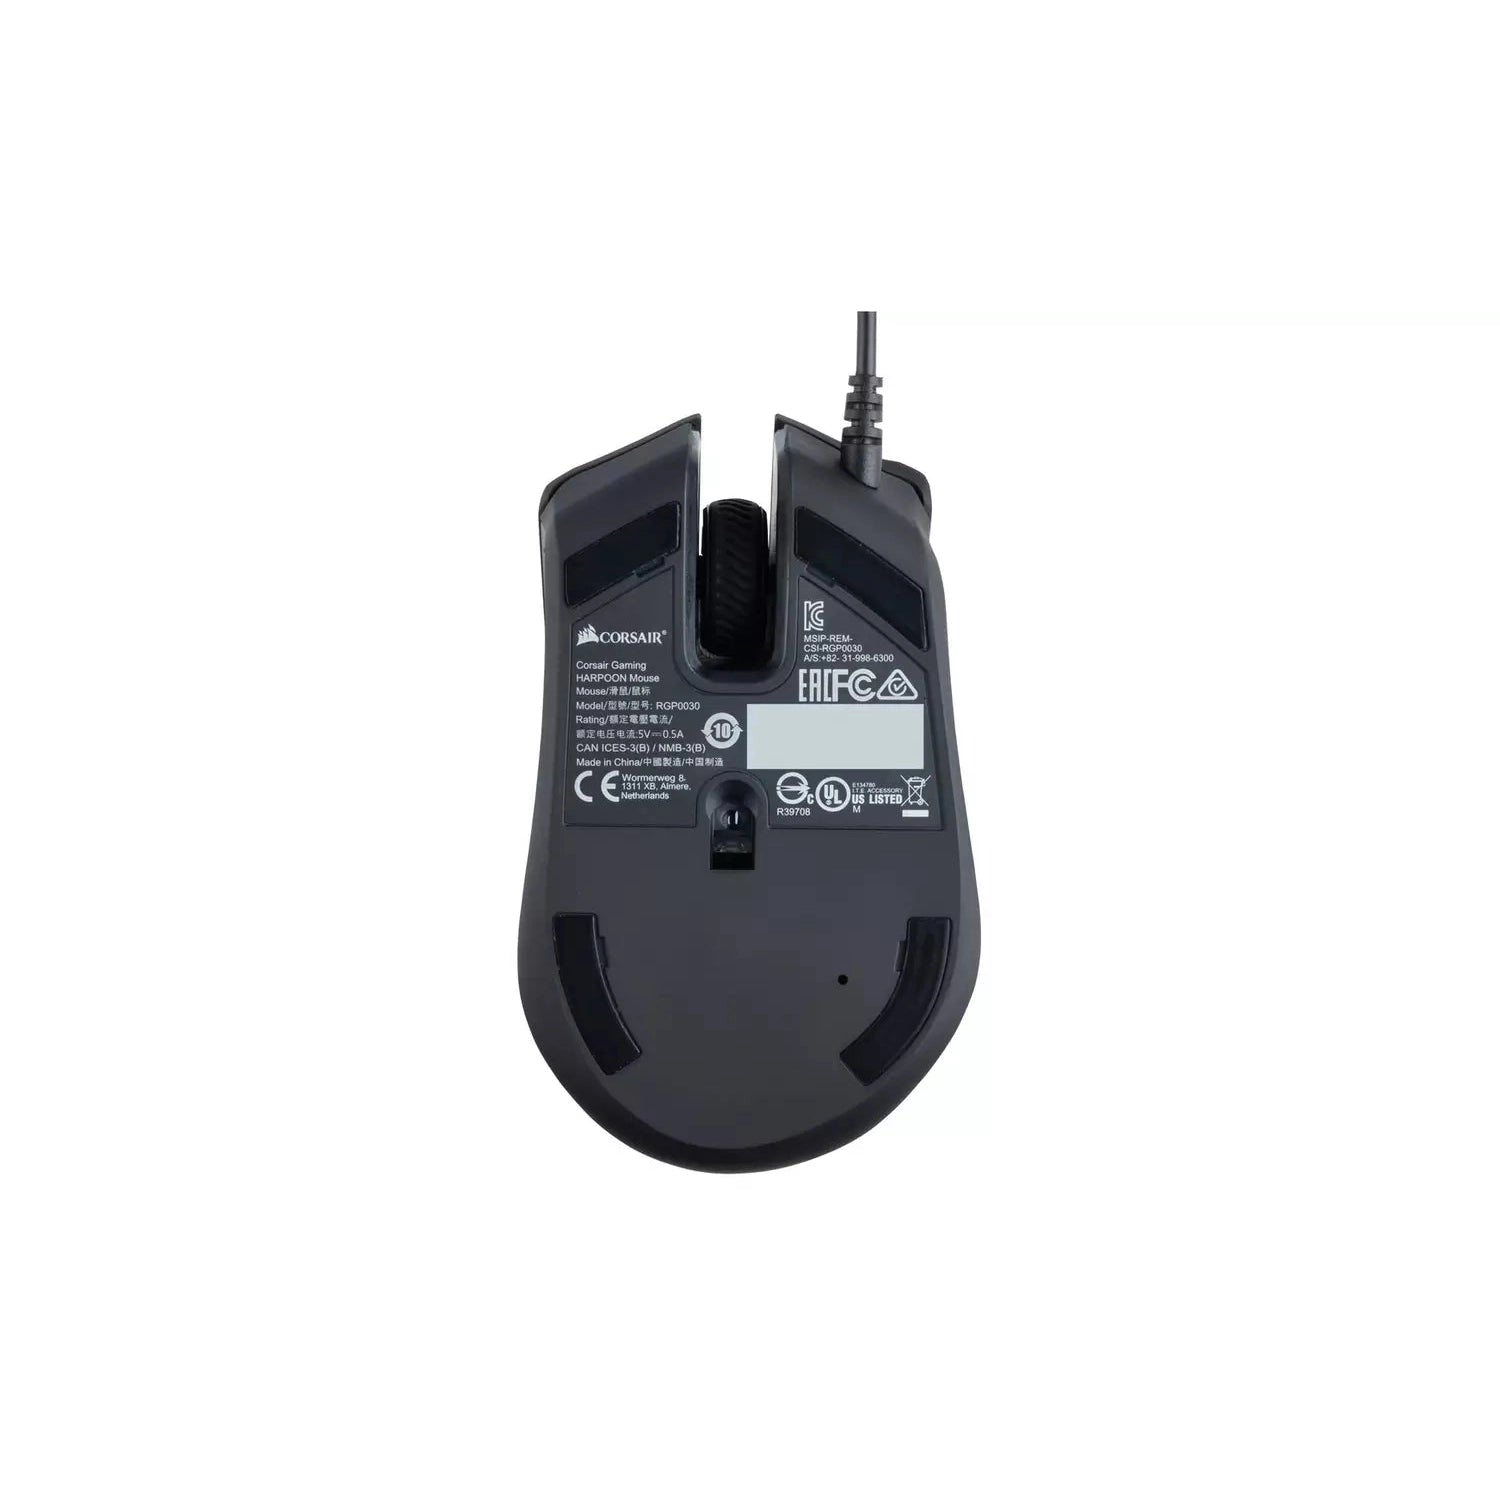 Corsair Harpoon RGB Pro Wired Gaming Mouse - Black